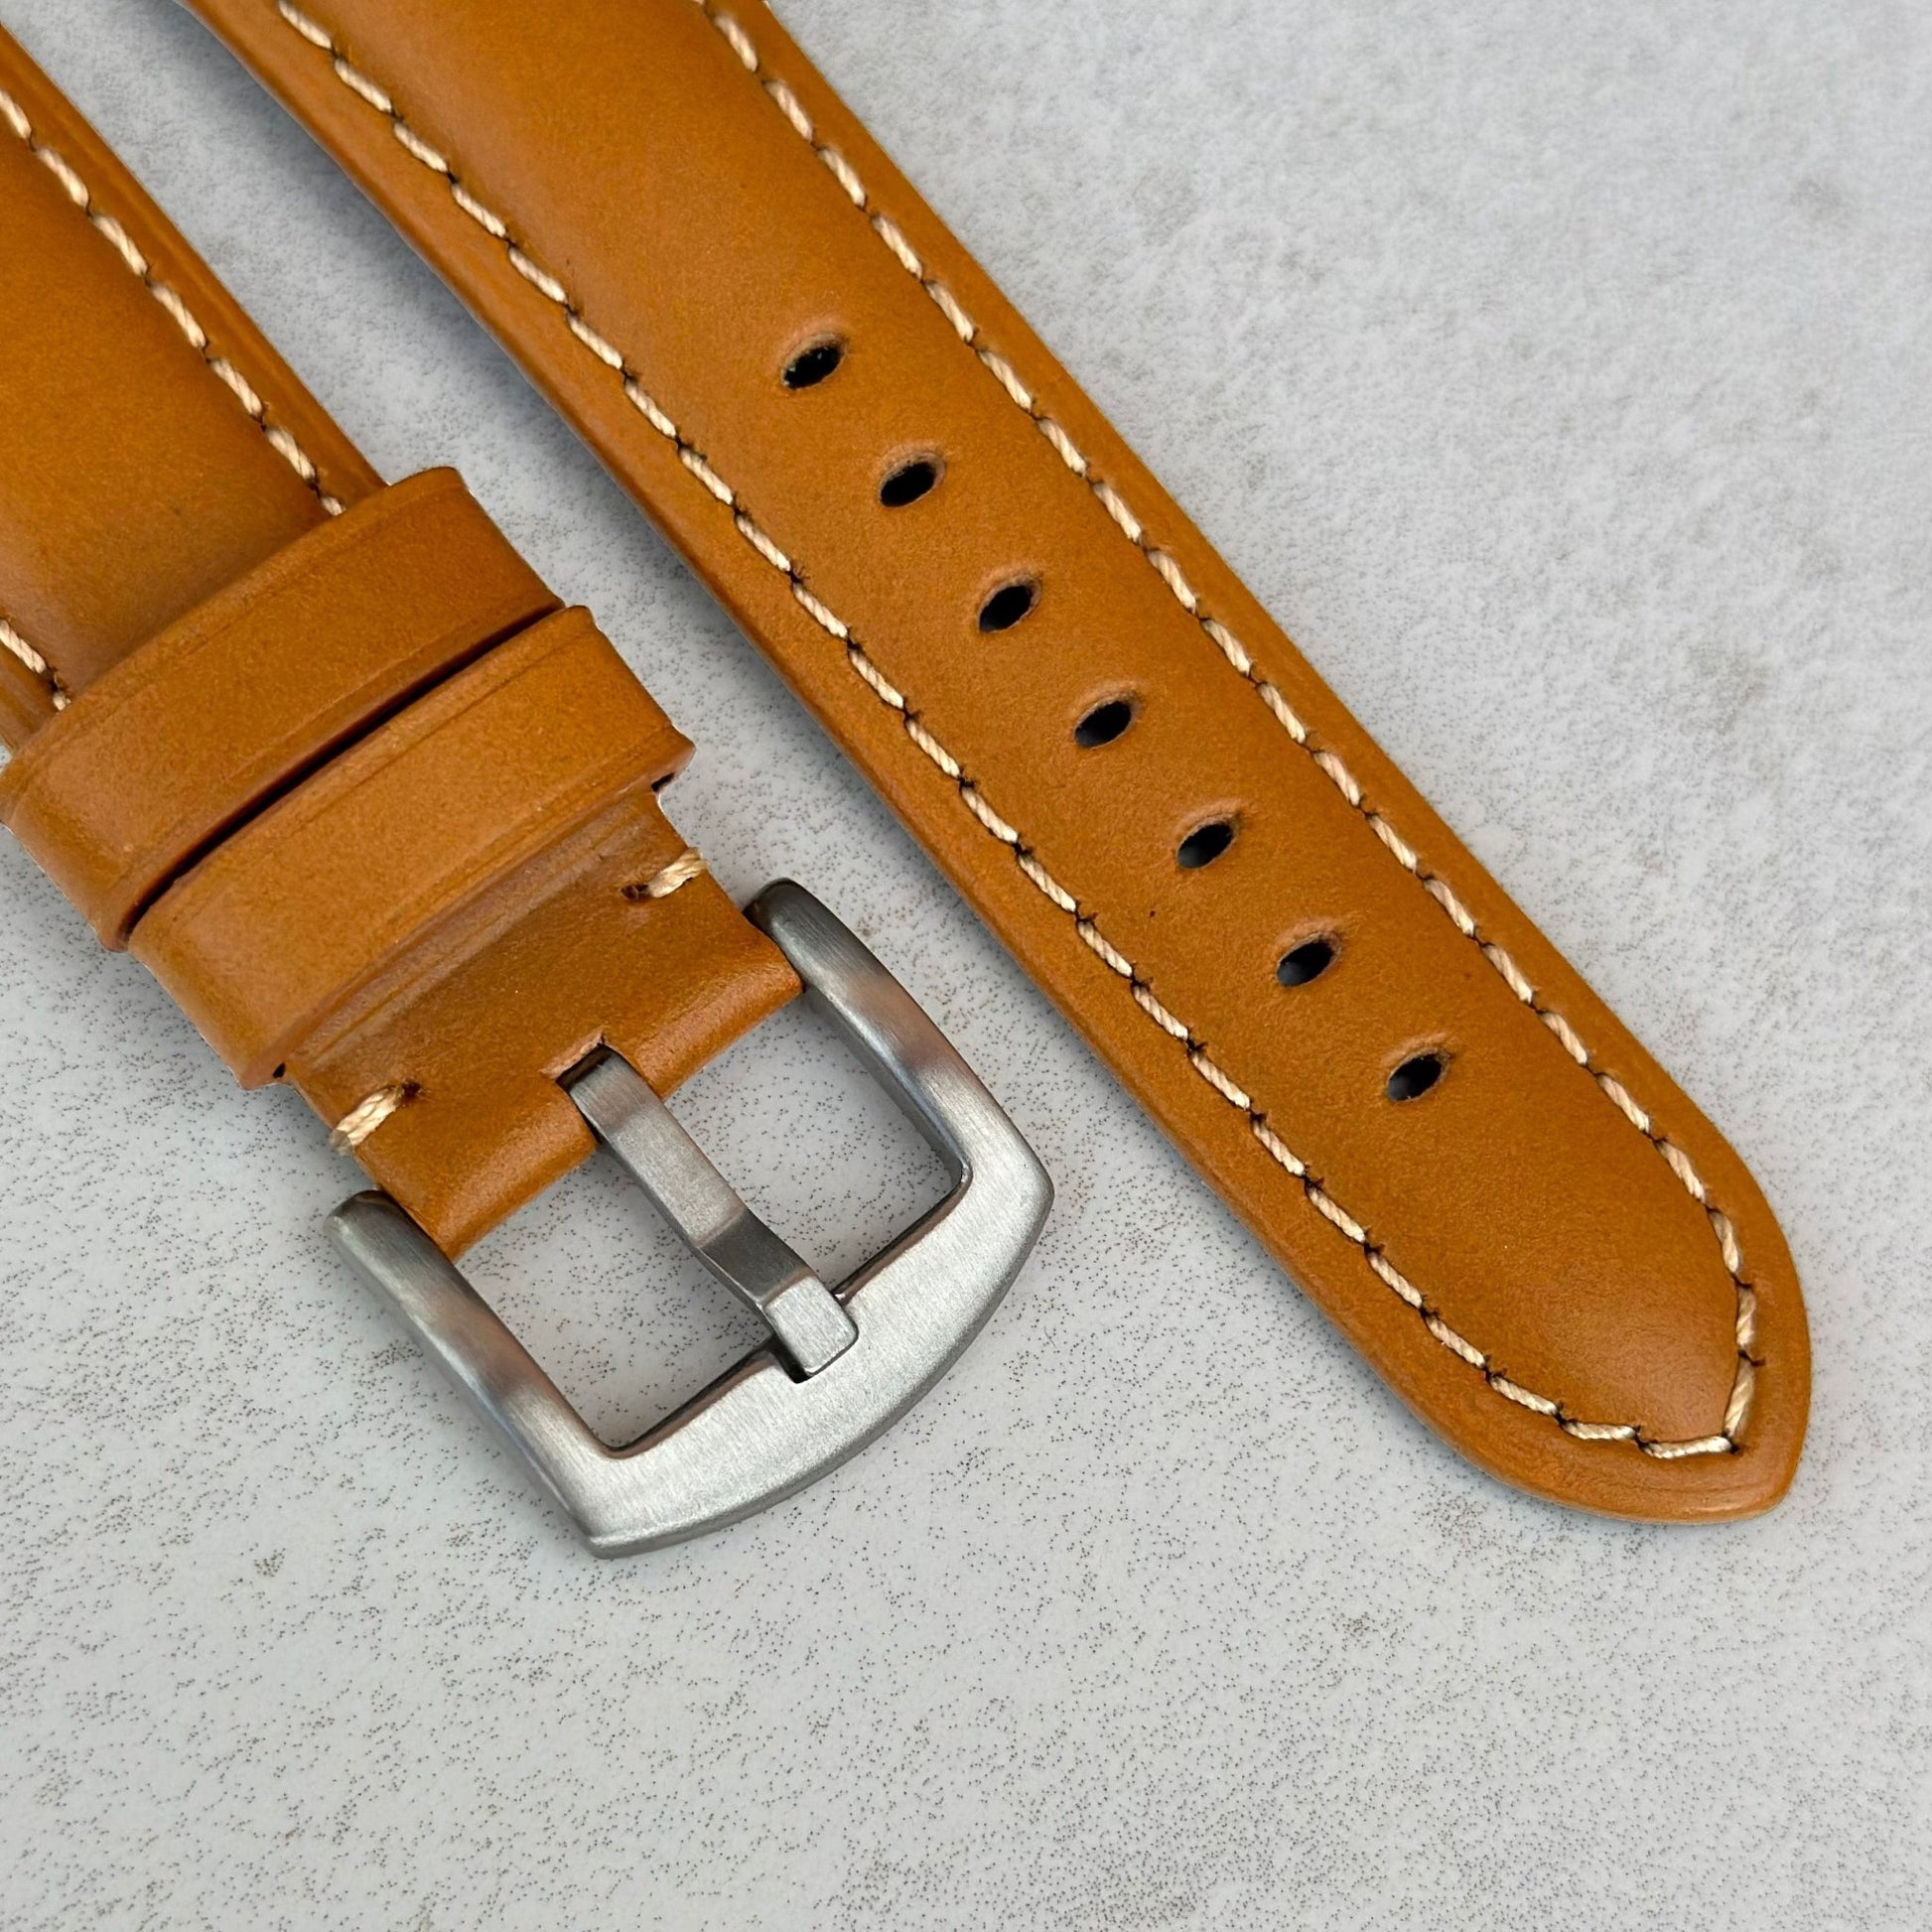 Brushed 316L stainless steel buckle on the Oslo tan full grain leather watch strap. Watch And Strap